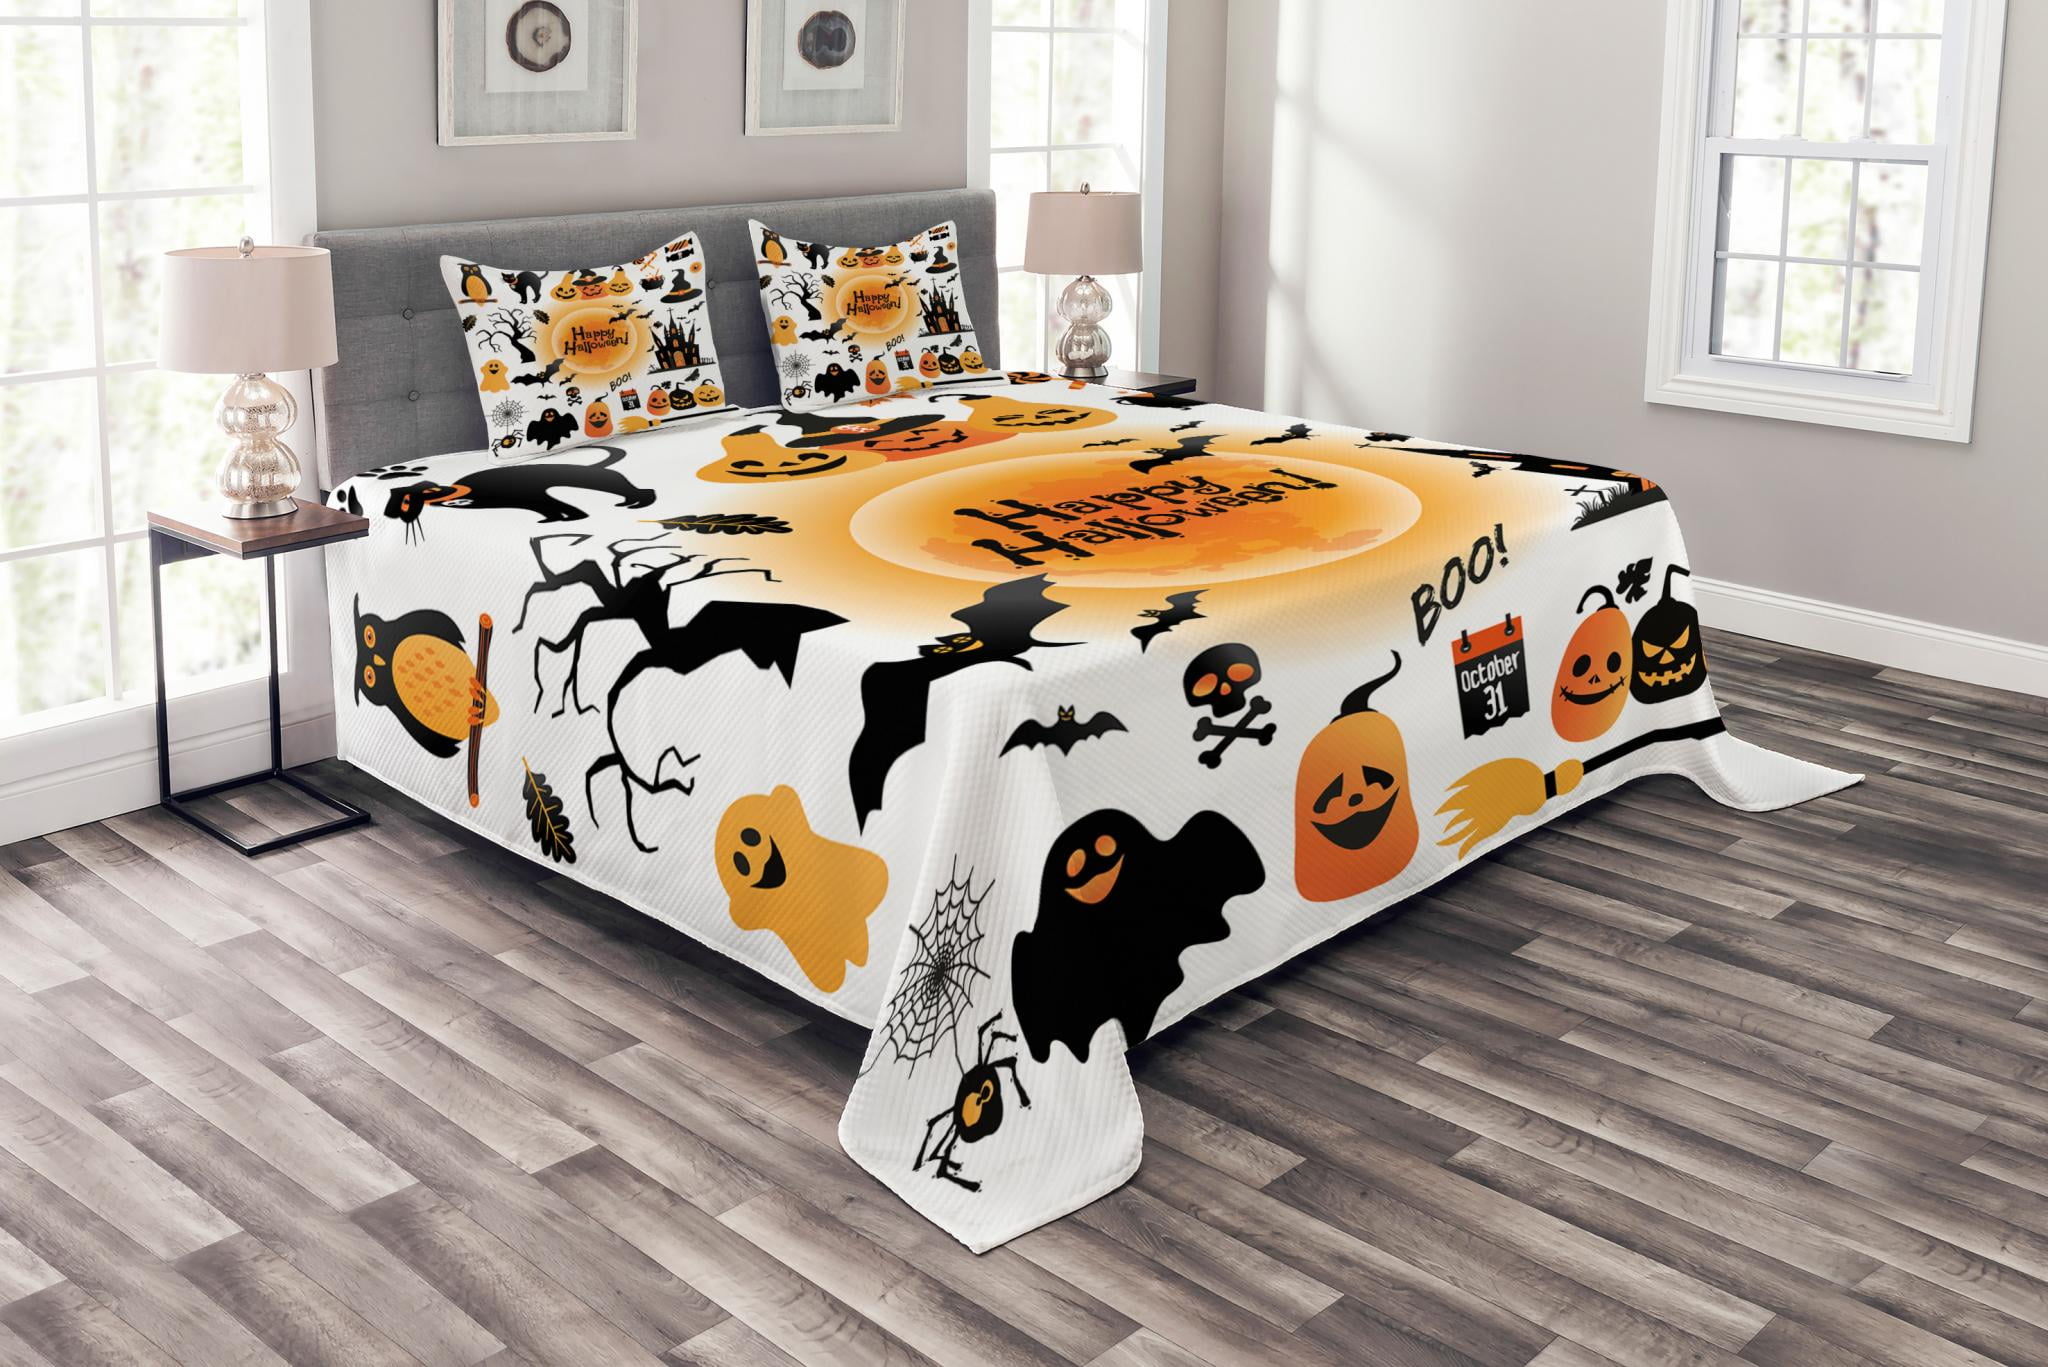 Yorkshire are Angles Halloween Halloween Quilts Blanket Twin Super King Size Best Decorative for Bedroom Living Room Home Decor Queen King 